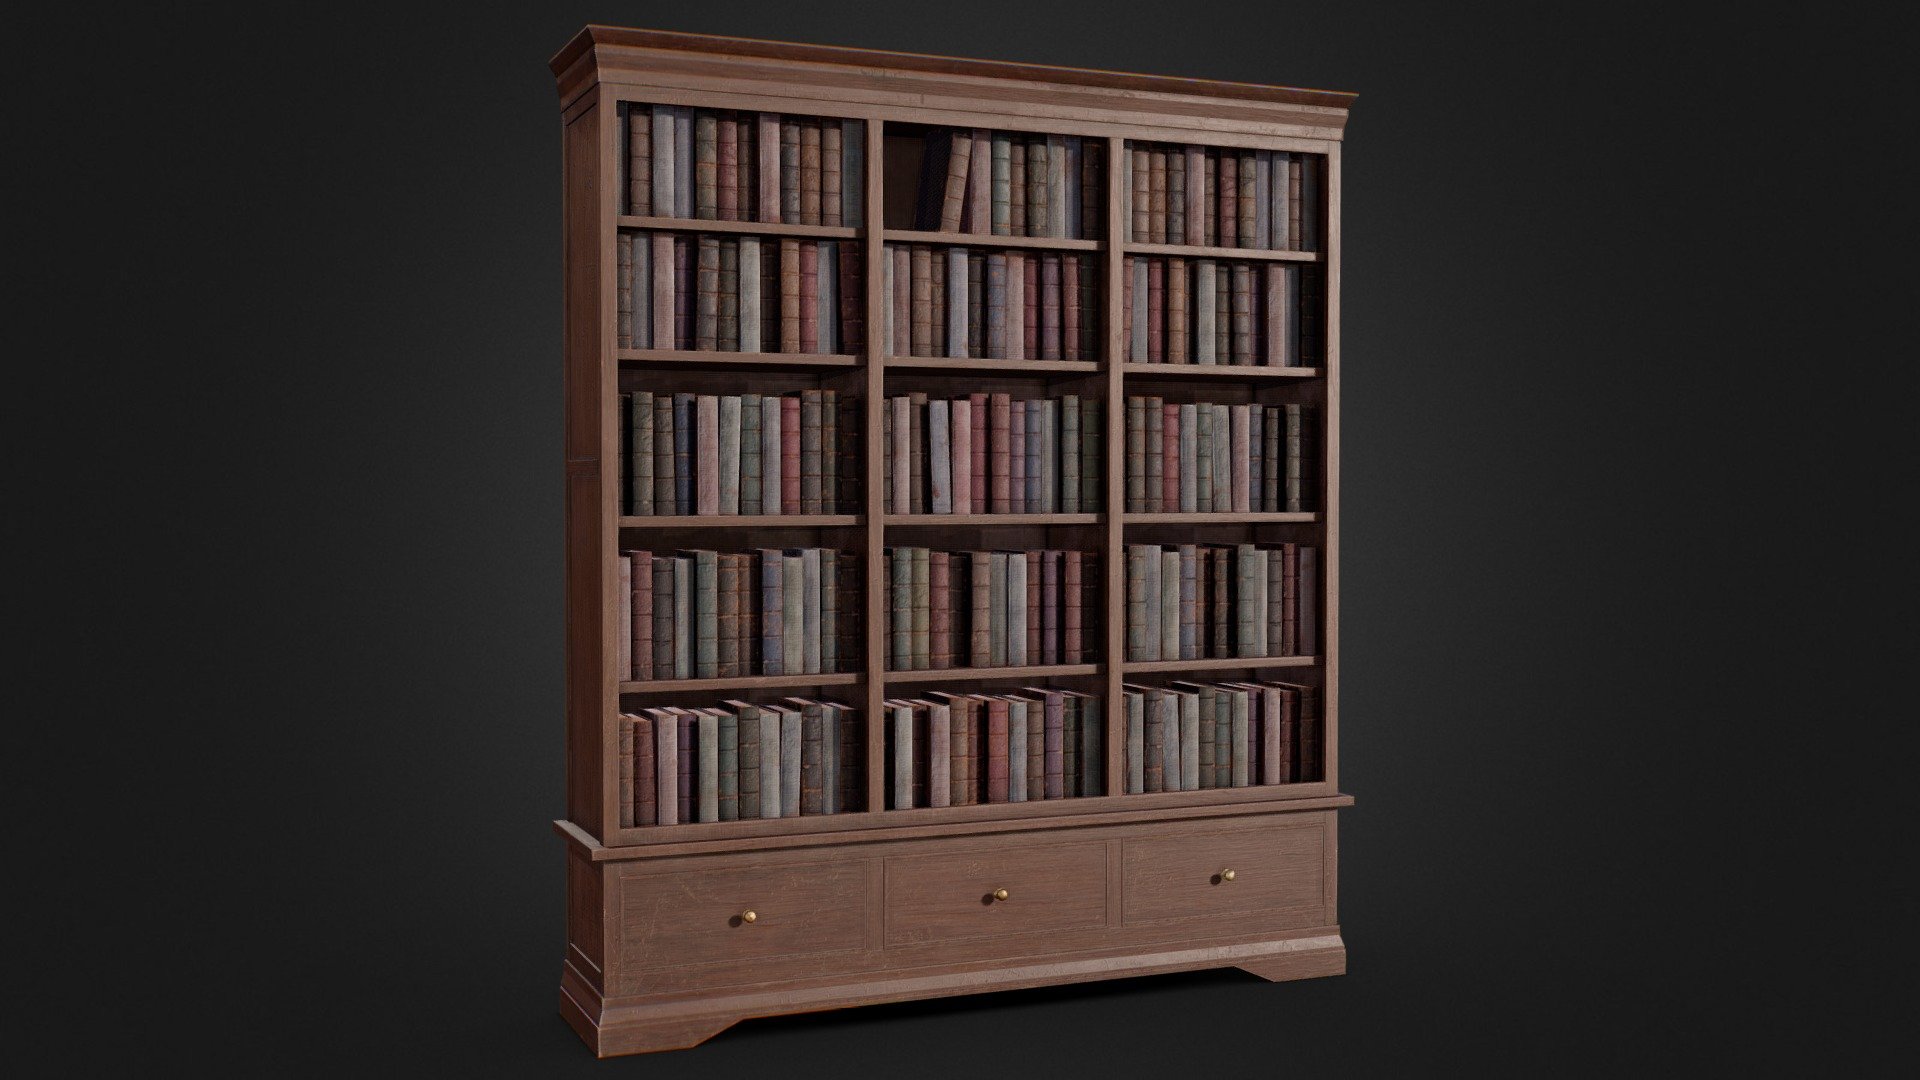 A low-poly, game ready bookcase. This model looks great in any themed environment and is suitable for use in game, VR, archviz and visual production. 

Features




Model includes victorian inspired bookcase and books. The draws are seperate objects and can be opened

Clean topology. Objects are grouped, named appropriately and unwrapped

Modelled in Blender and textured in Substance Painter

Additional File includes Blender file with high poly mesh

9,002 triangle count

Textures




2 PBR texture sets at 4096x4096. 1 for the bookcase and 1 for the books

Metal Roughness: Base Colour, Roughness, Normal, Metallic

Unreal Engine: Base Colour, OcclusionRoughnessMetallic, Normal

Unity: Base Colour, MaskMap, Normal

Check it out on Artstation

 - Victorian Bookcase - Buy Royalty Free 3D model by Matthew Collings (@mtcollings) 3d model